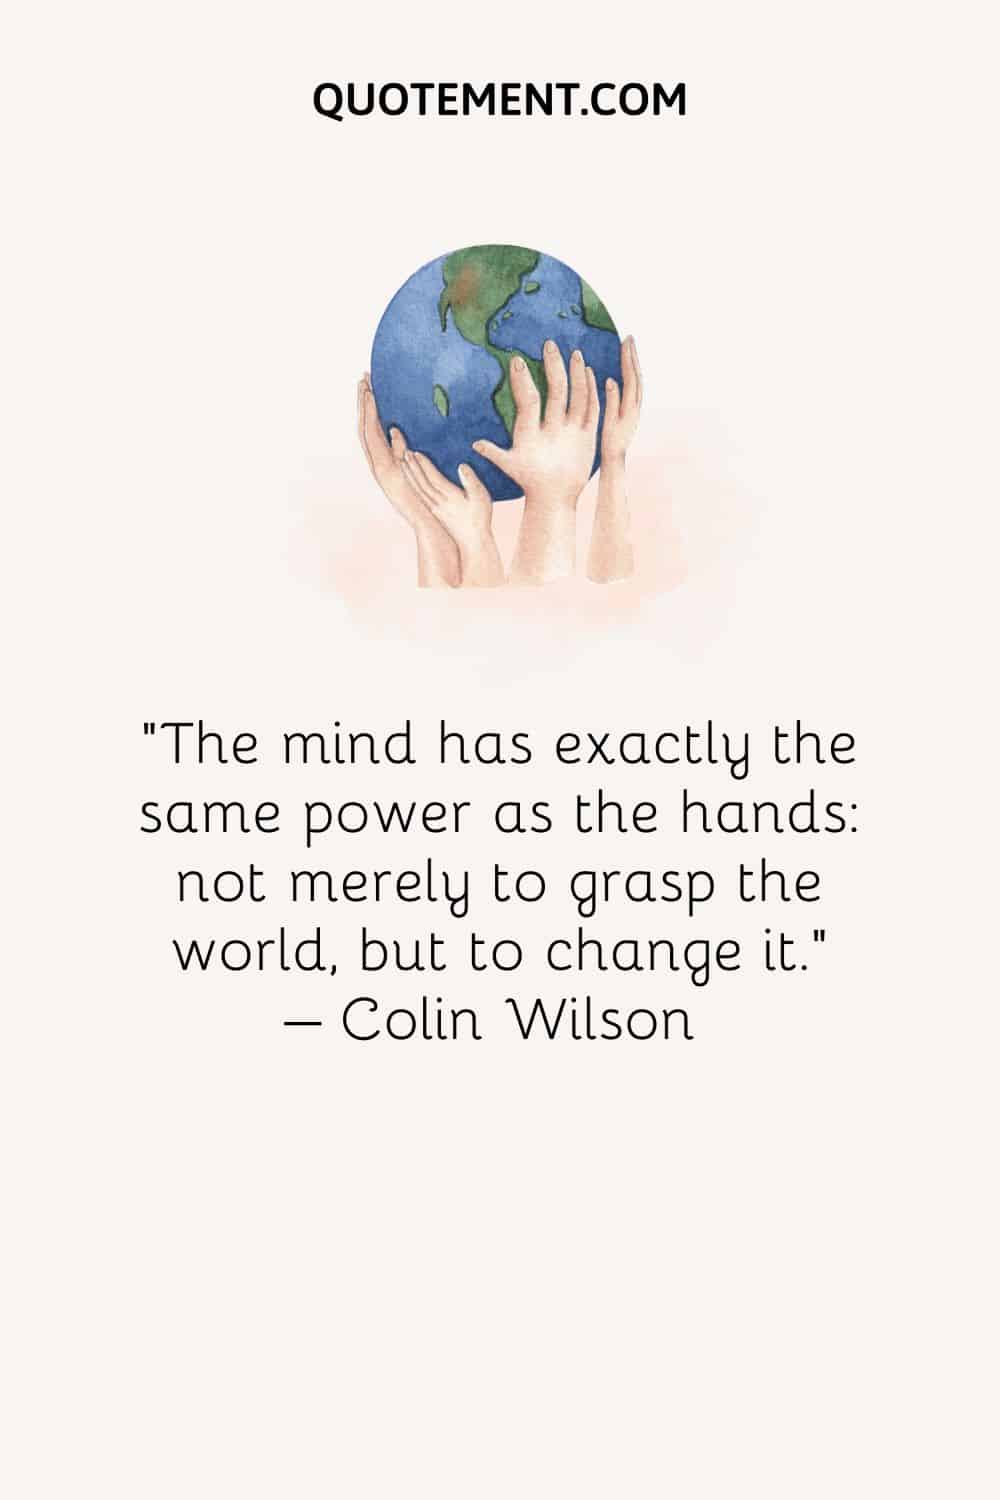 The mind has exactly the same power as the hands not merely to grasp the world, but to change it